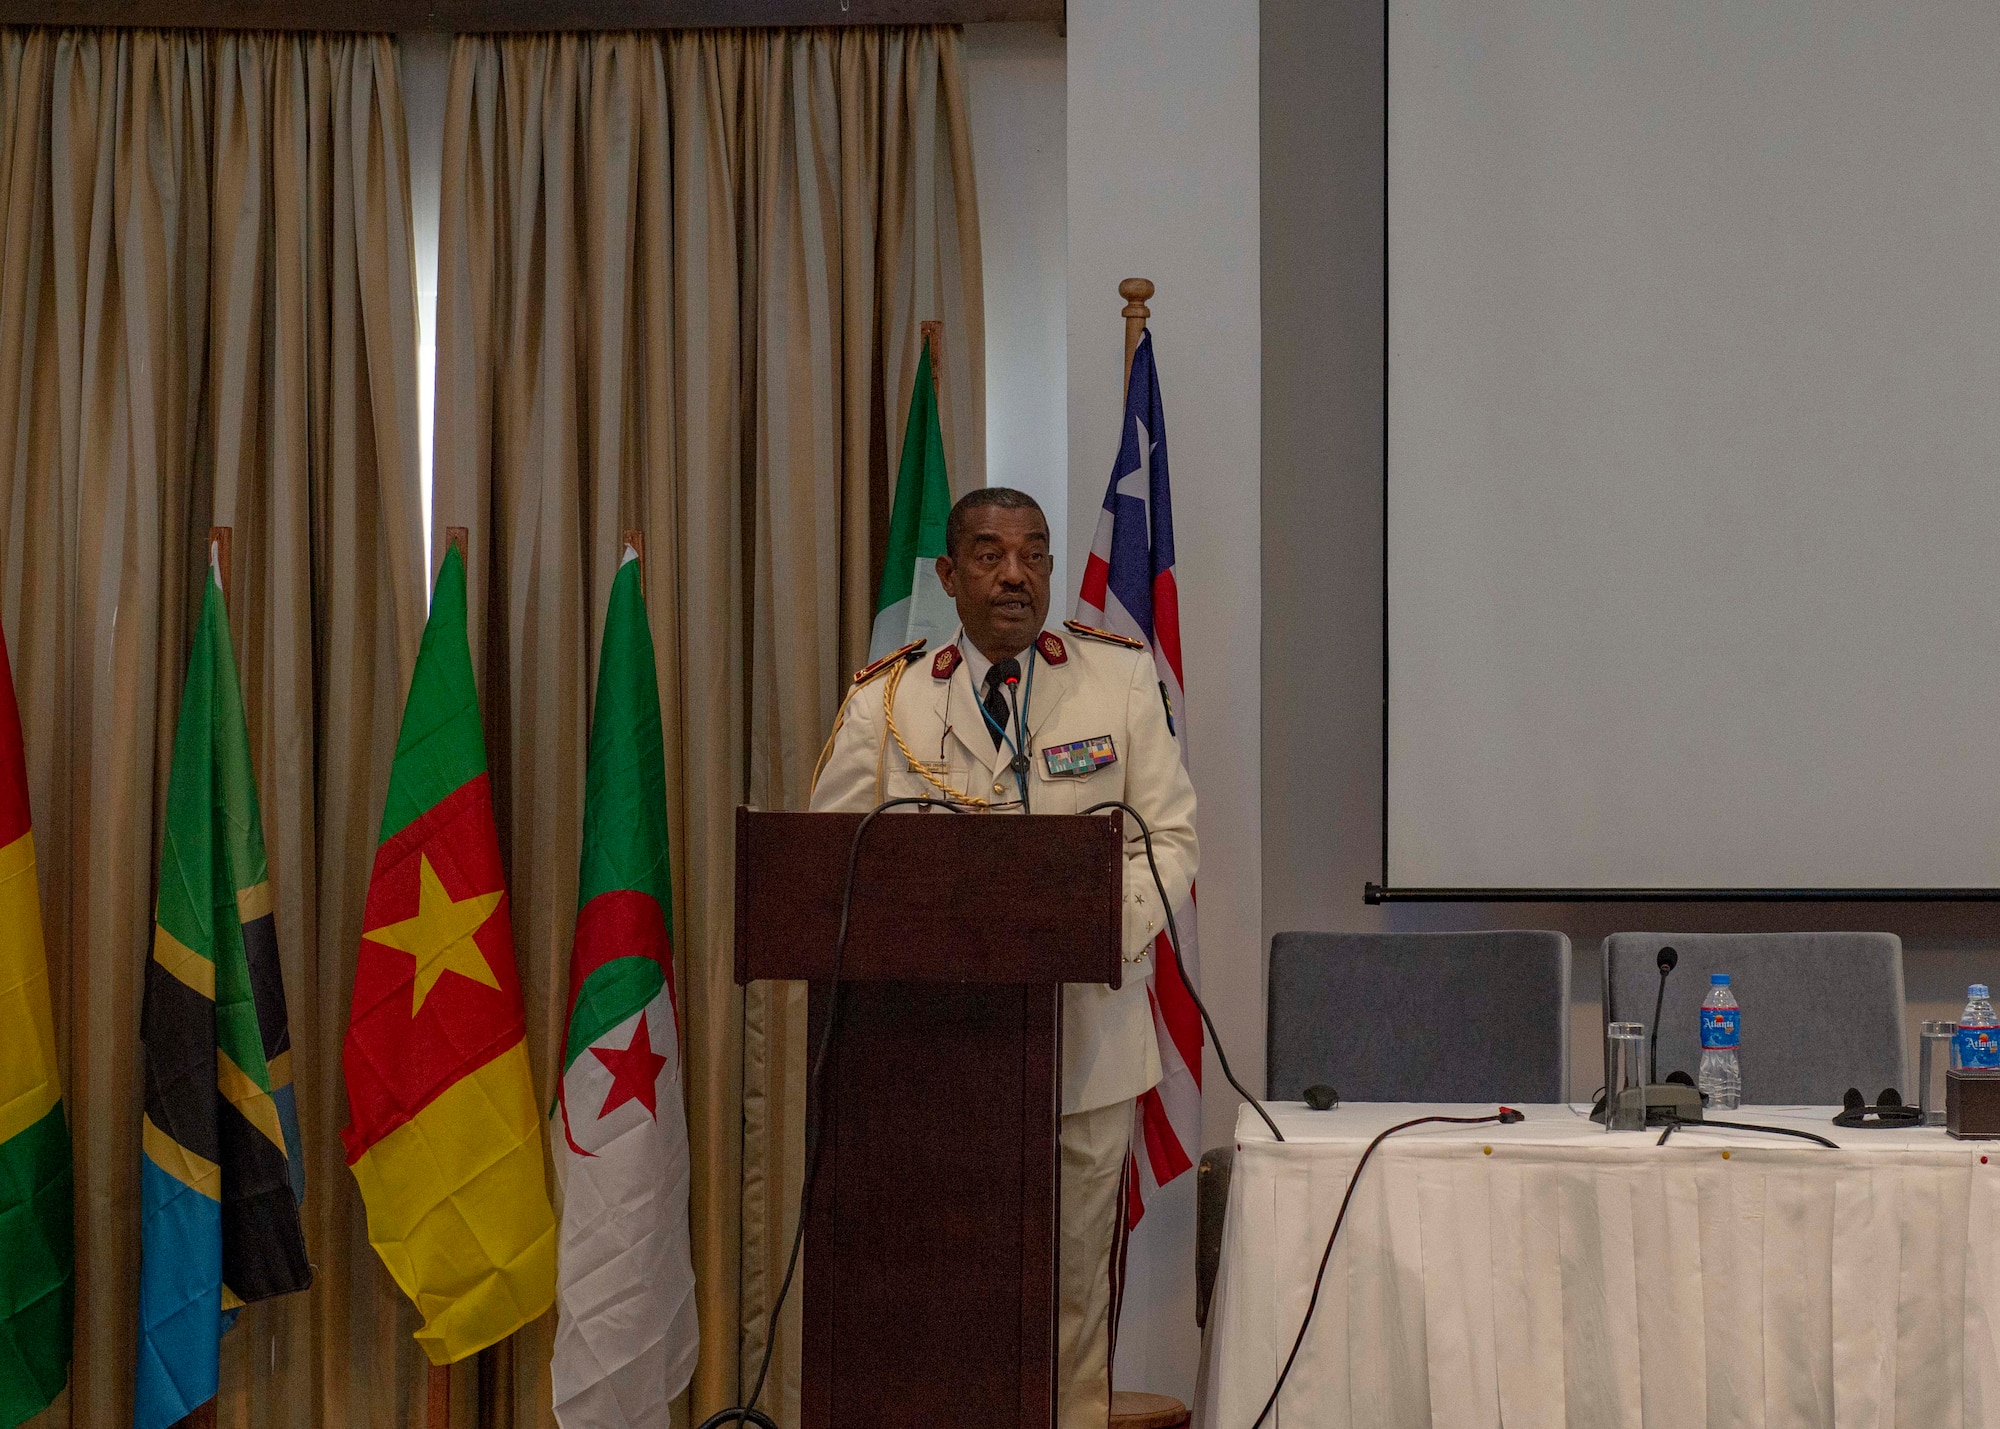 General Jeanot Essono Engueng, Armed Forces of Gabon, gives remarks during the closing ceremony of an African Partner Outbreak Response Alliance (APORA) conference in Monrovia, Liberia. During APORA, military and civilian leaders will work together to align best practices and improve response capabilities for potential outbreaks of contagious diseases. The training will help bolster relationships with current partners, and mobilize new partners to strengthen pandemic programs. (U.S. Navy photo by Mass Communication Specialist 2nd Class Robert J. Baldock)